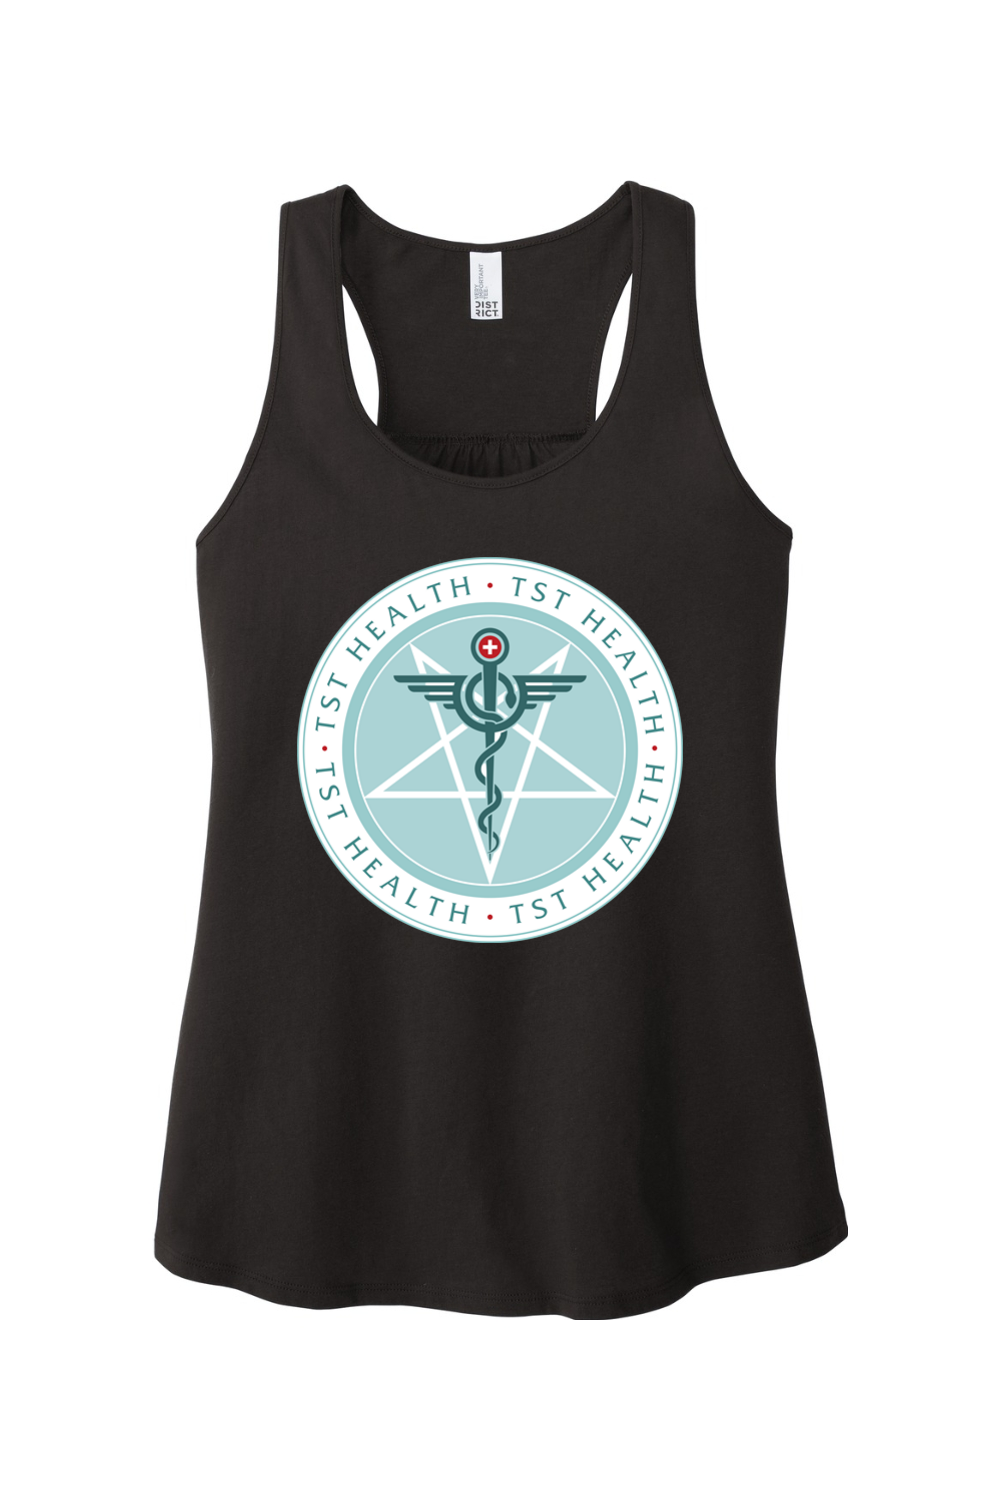 TST Health Fitted Tank